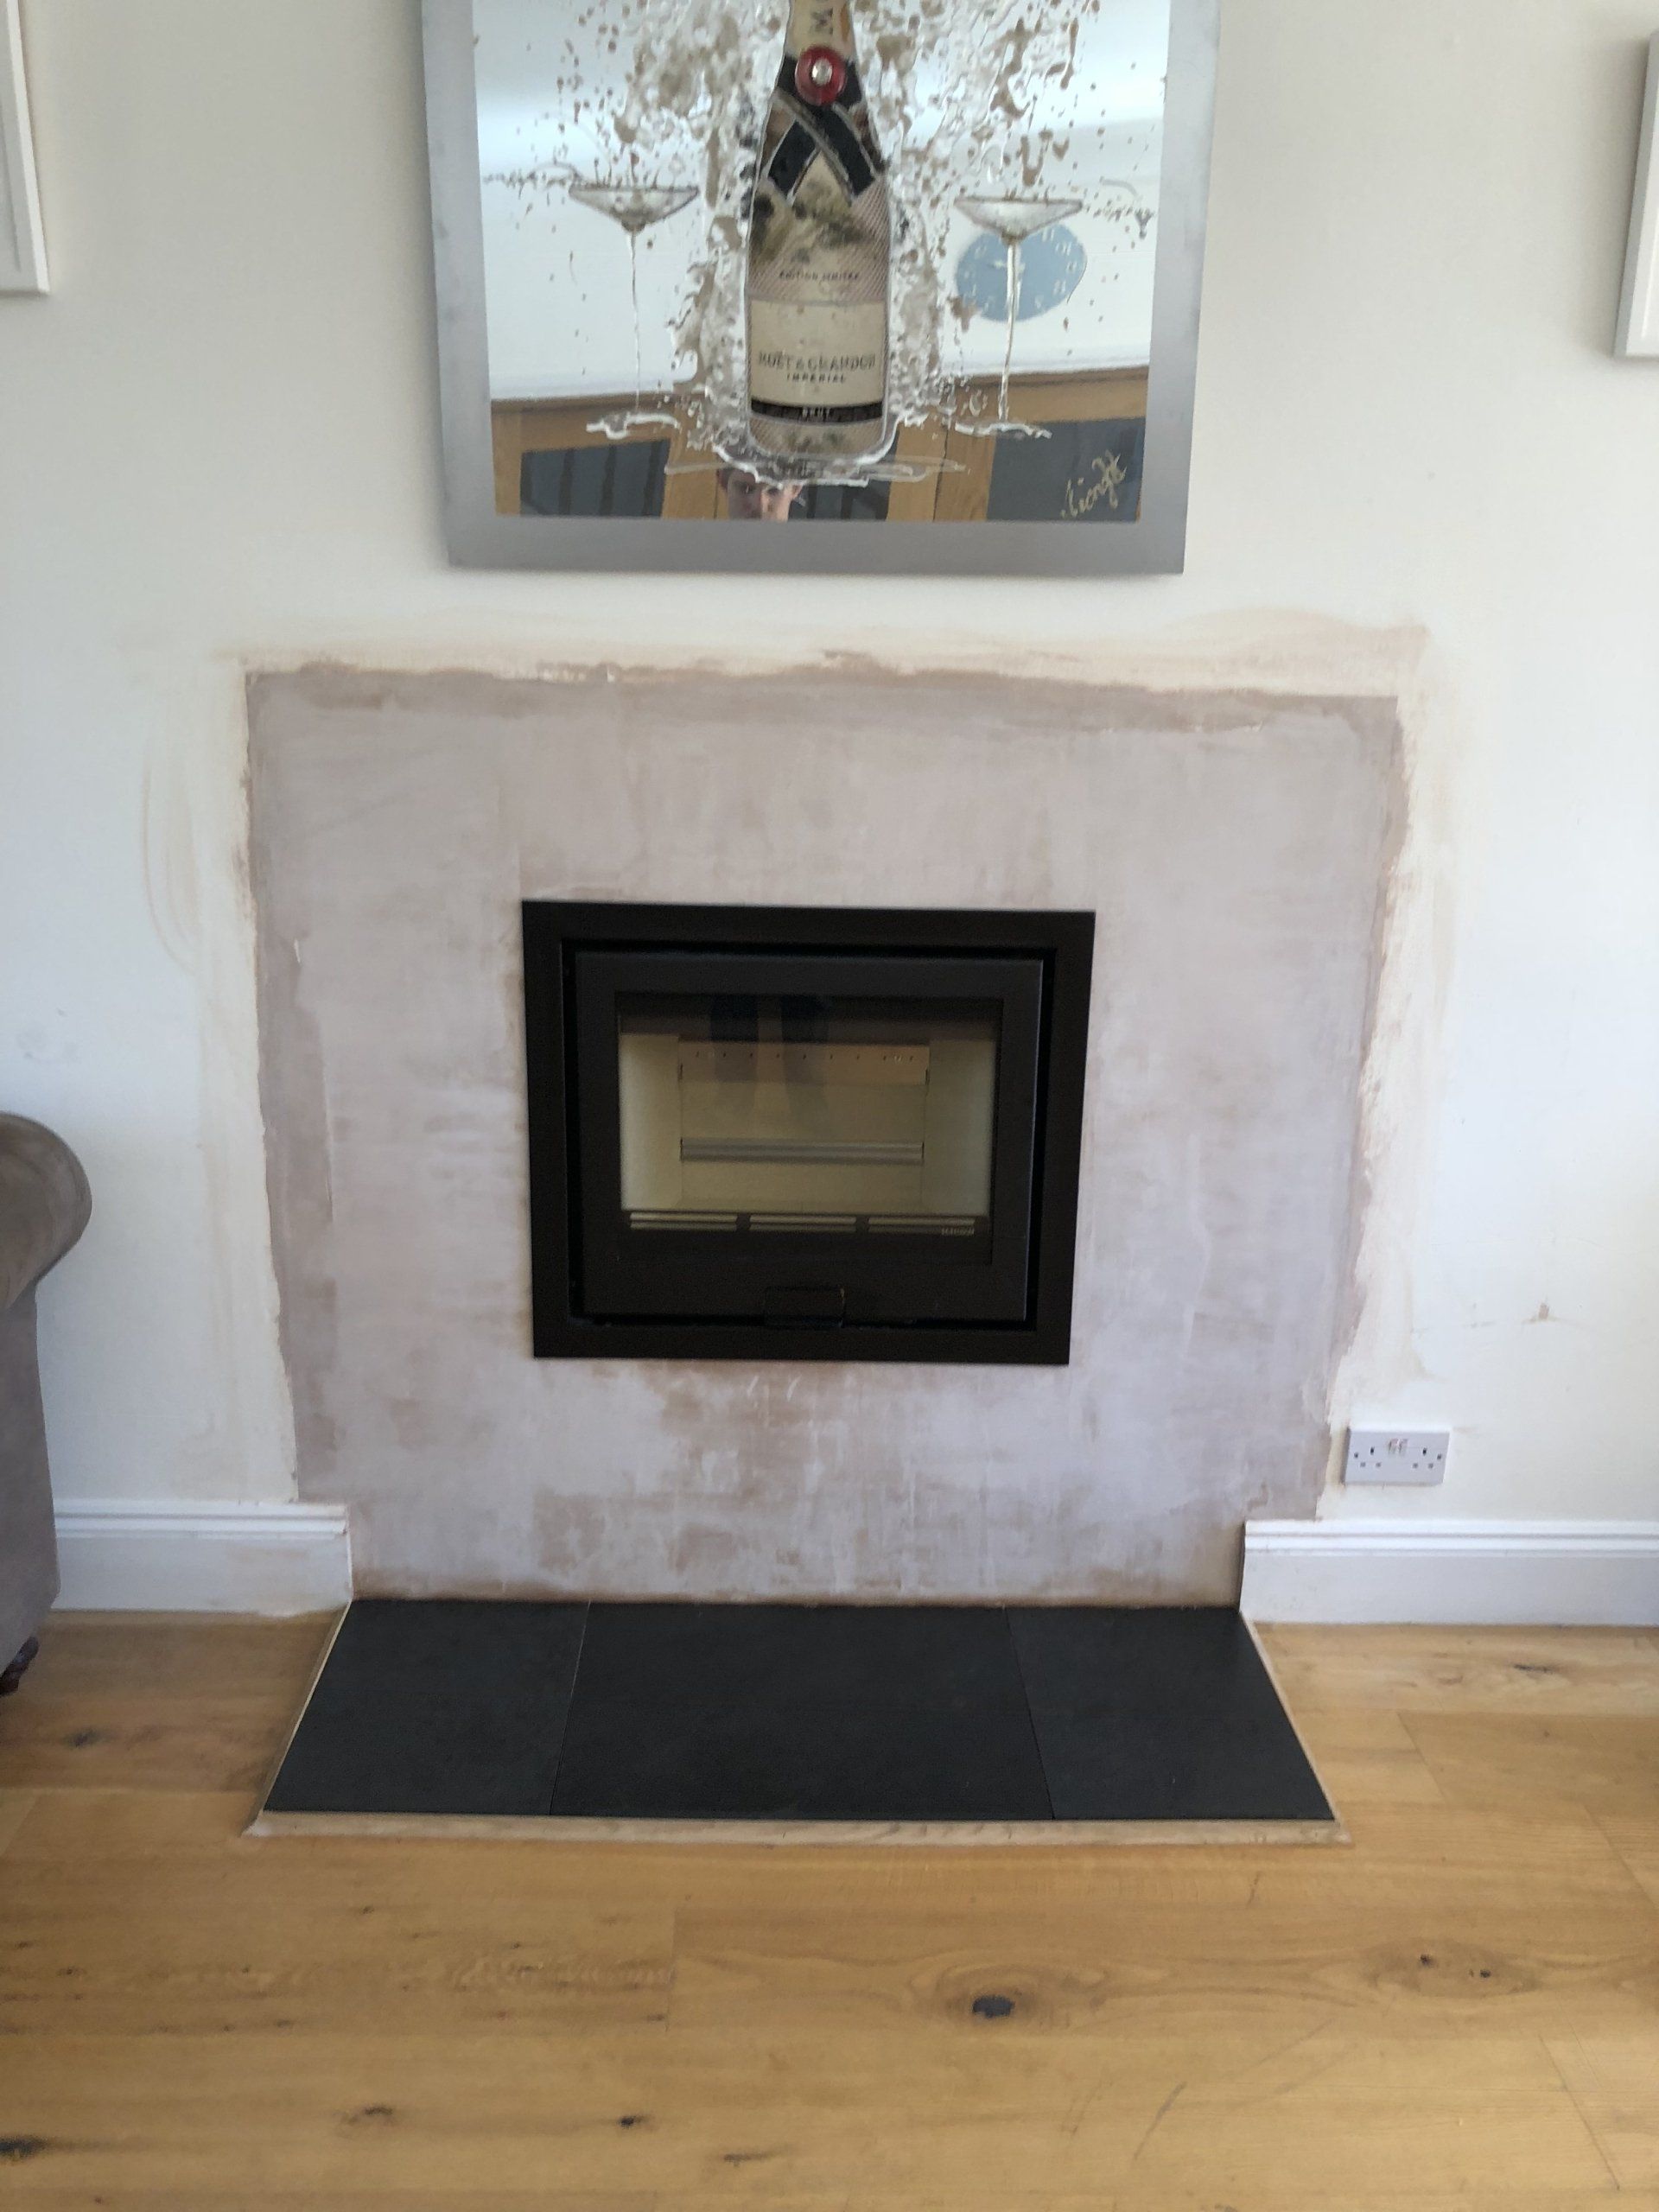 Di Lusso R6 inset wood burning stove